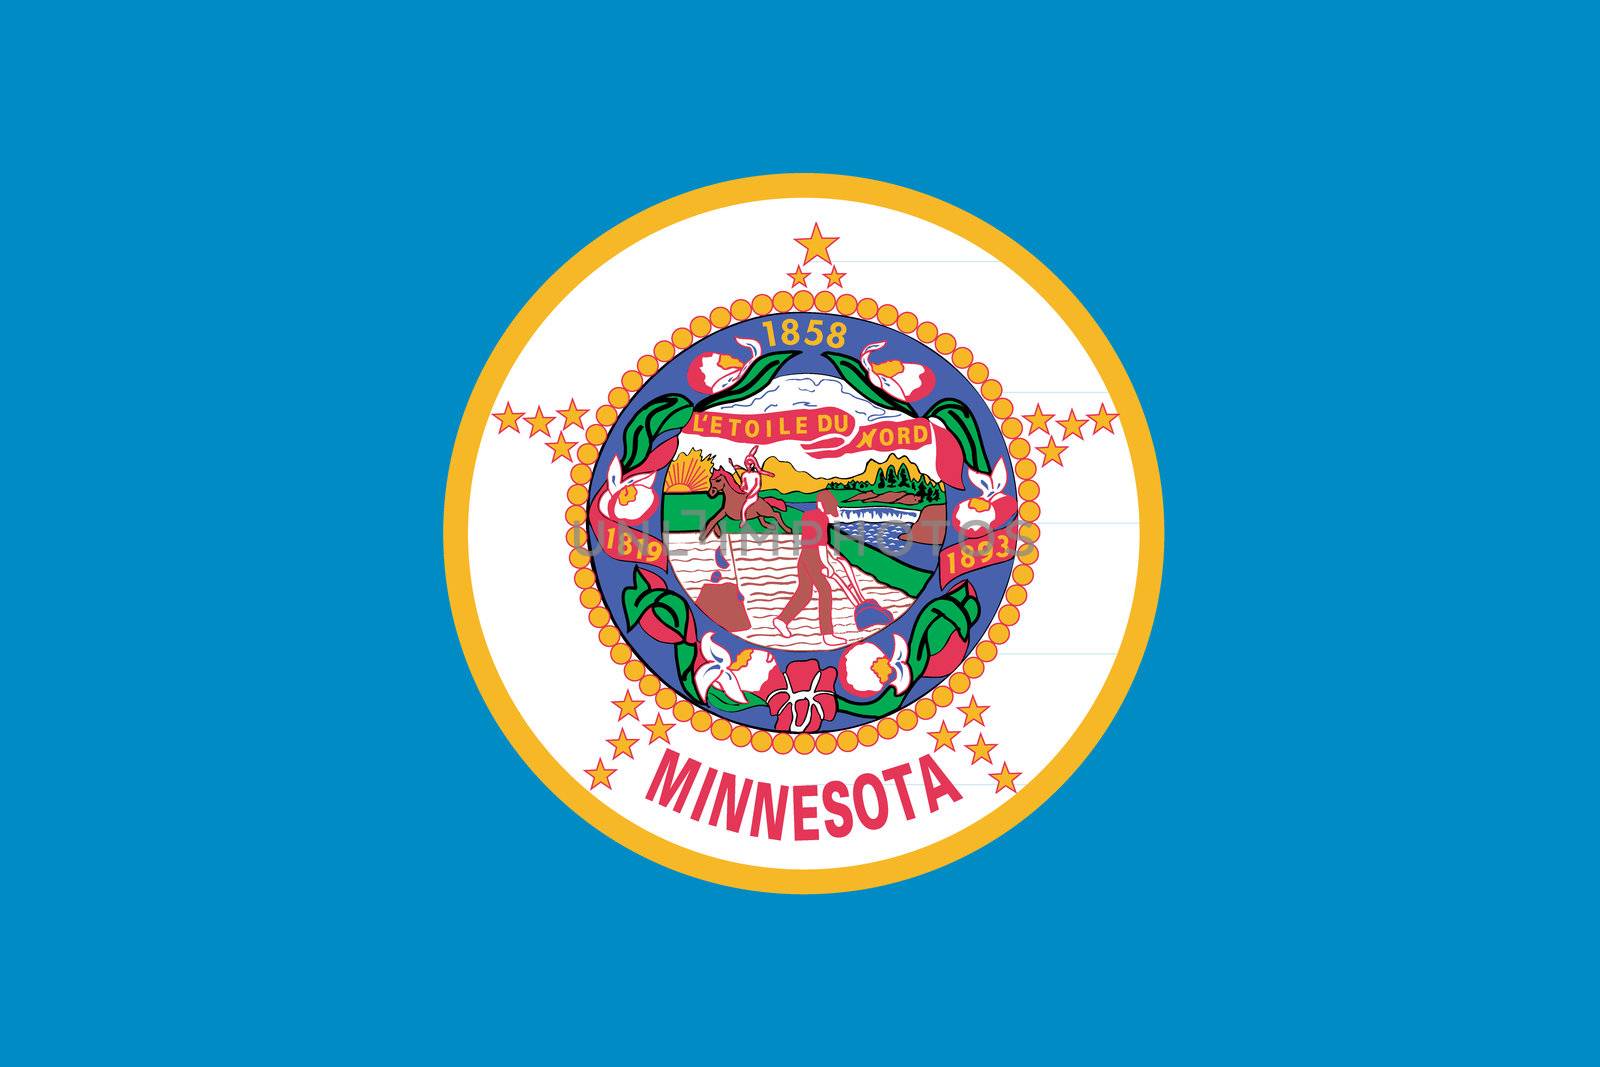 The Flag of the American State of Minnesota